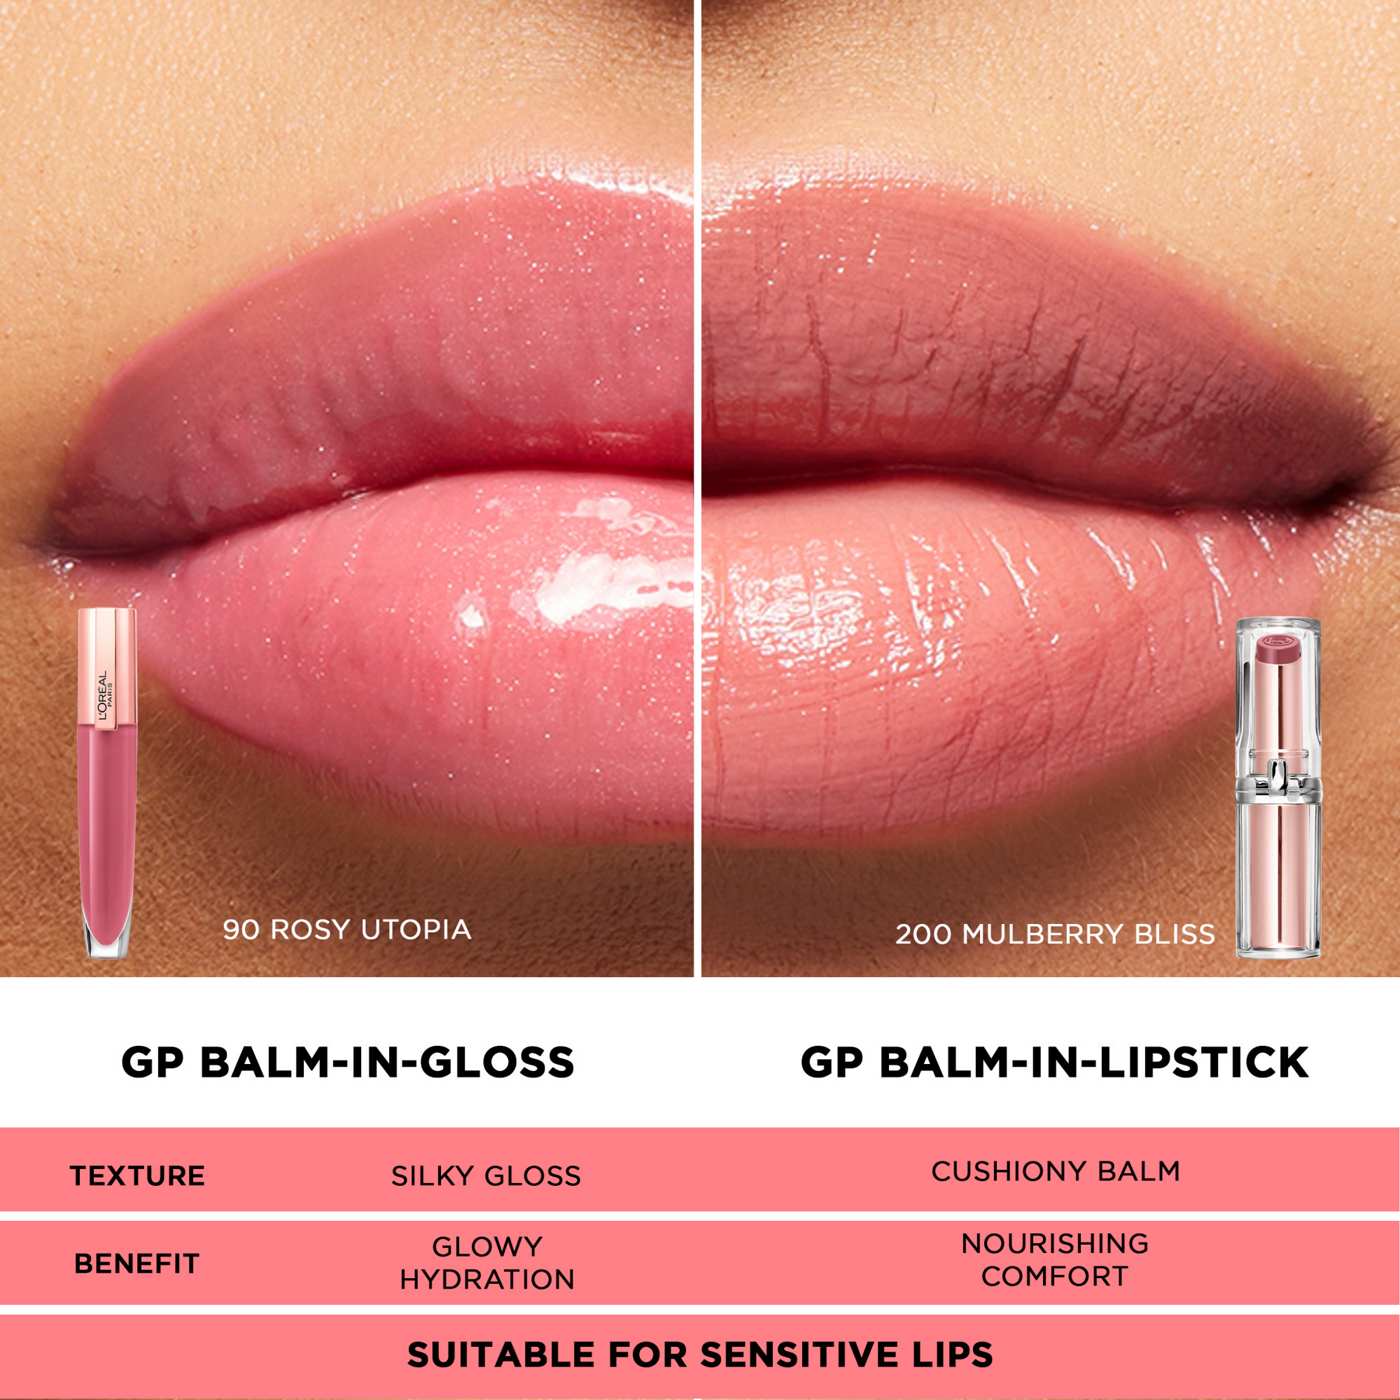 L'Oréal Paris Glow Paradise  Lip Balm-in-Gloss Pomegranate Extract Sophisticated Rose; image 4 of 6